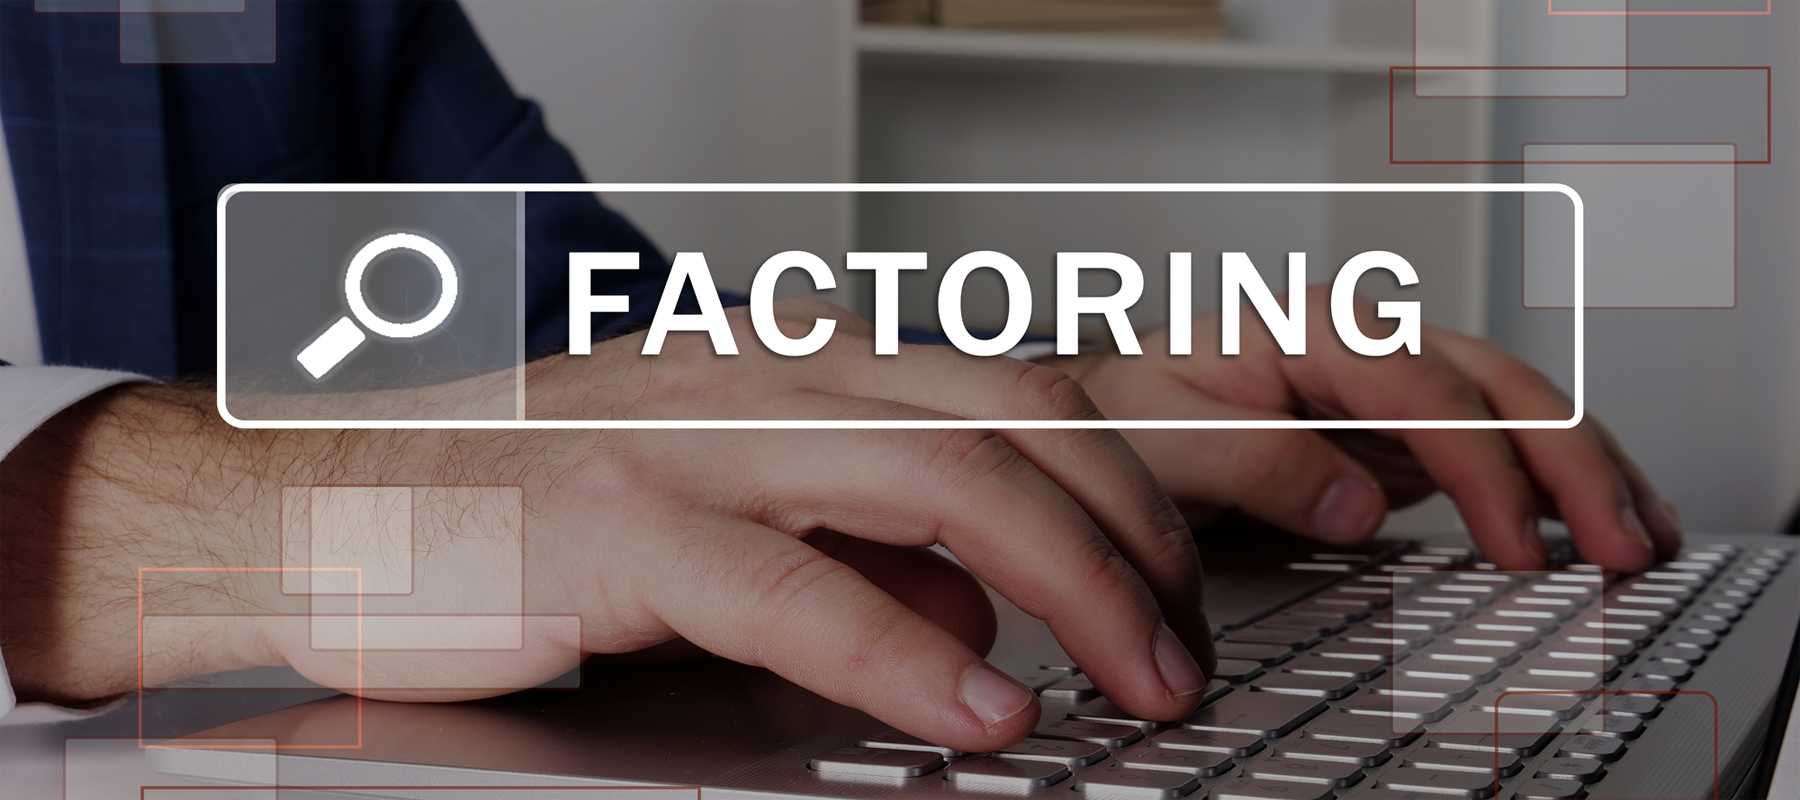 How Much Does Factoring Cost?